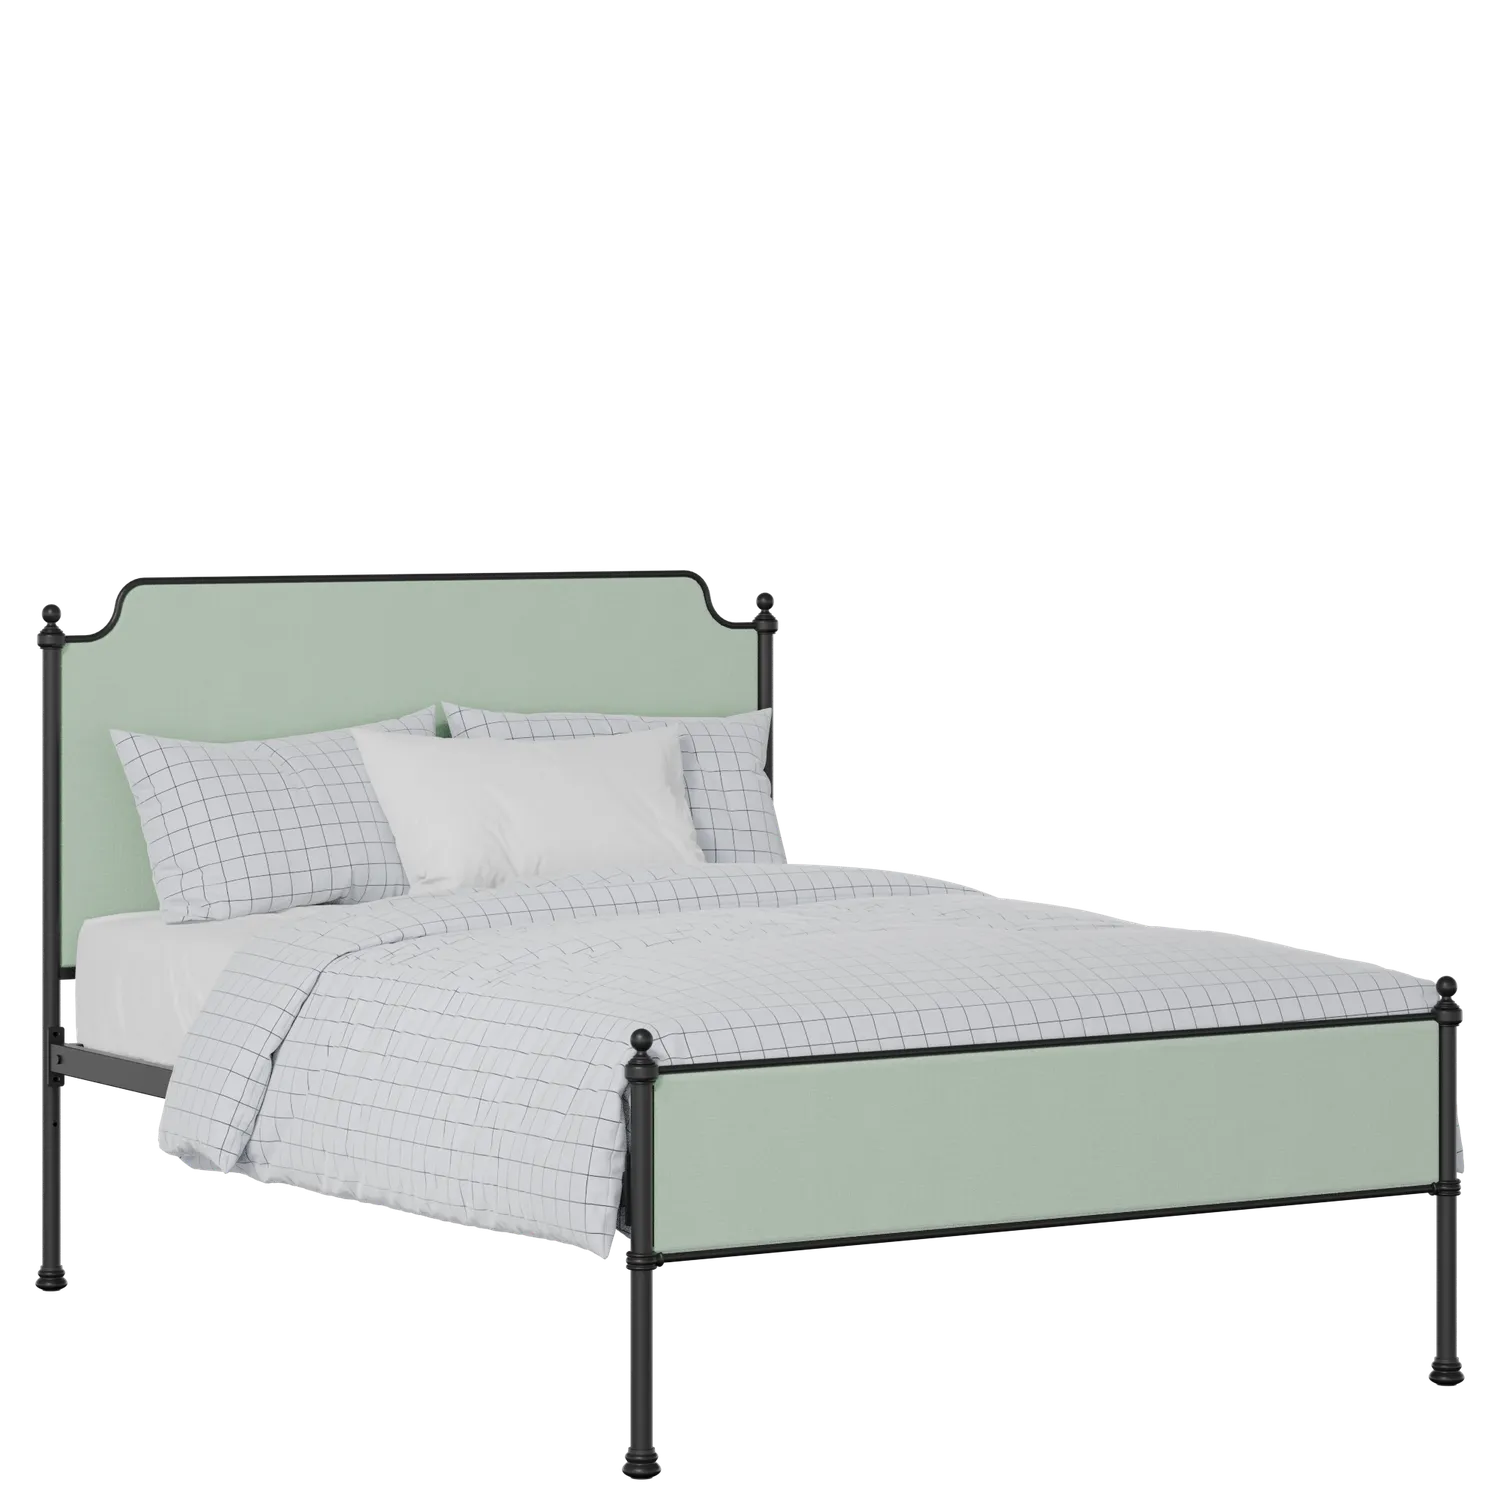 Miranda Slim iron/metal upholstered bed in black with mineral fabric